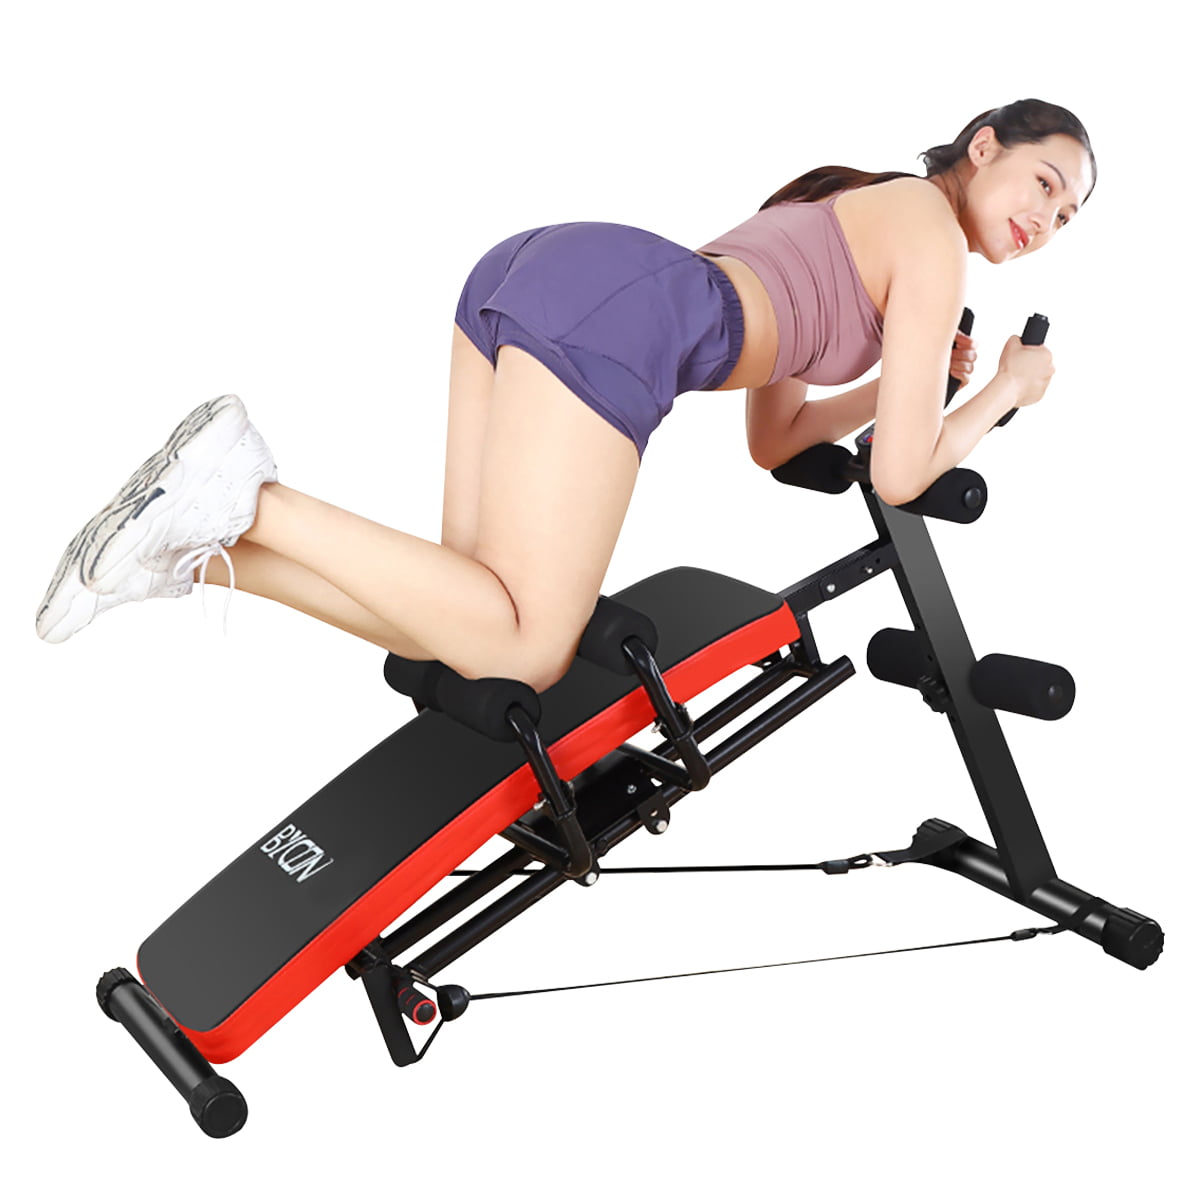 Details about   Adjustable Sit Up Bench Decline Abdominal Fitness Home Gym Exercise Equipment US 